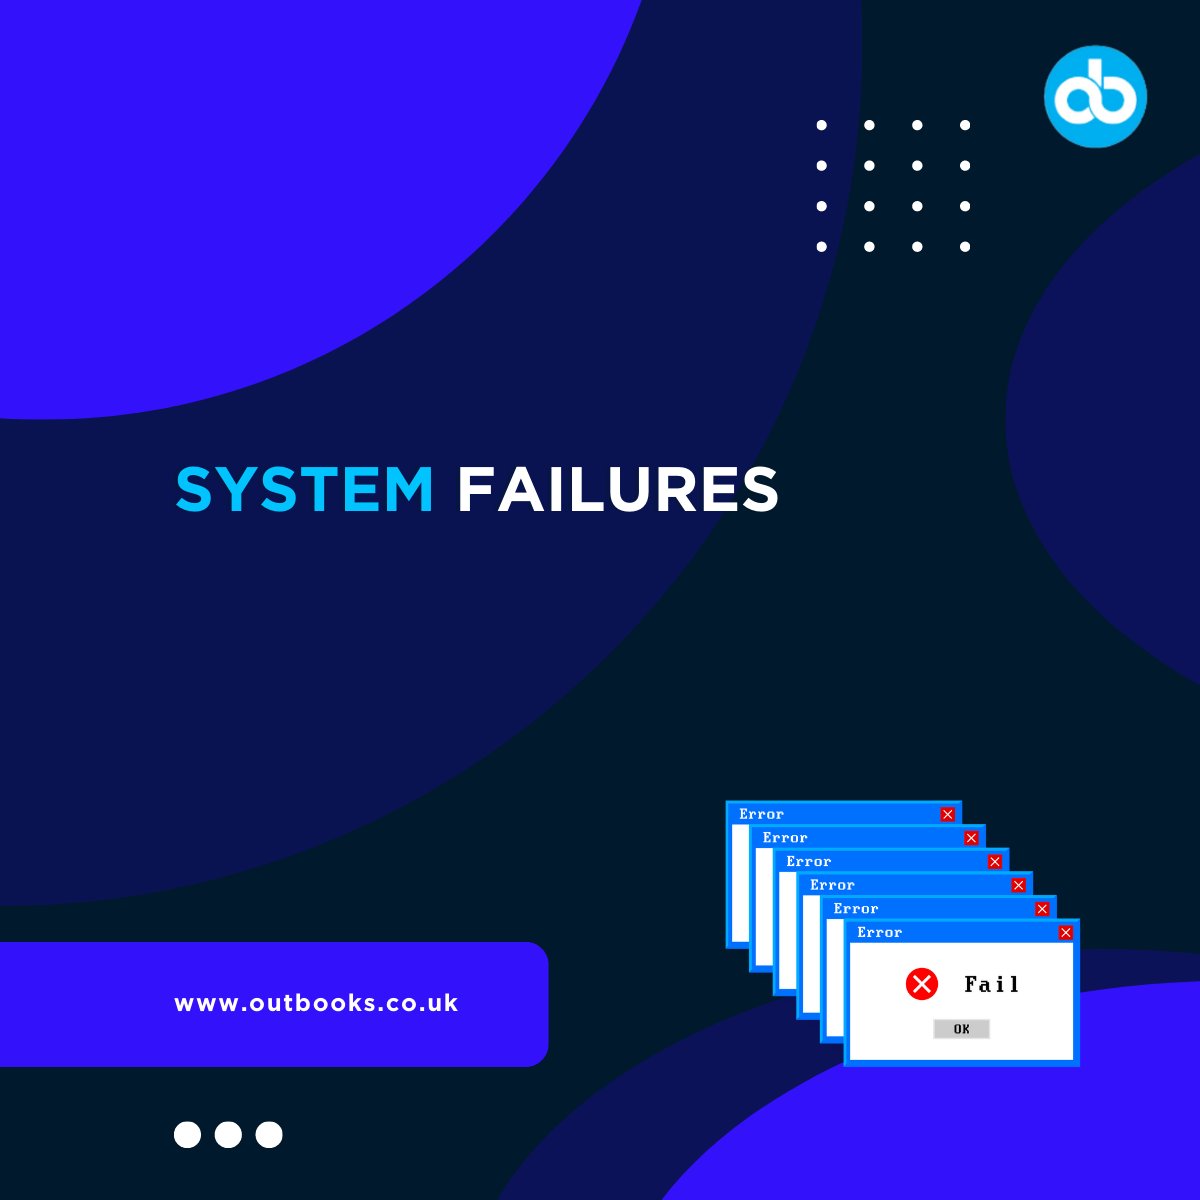 We identify the common accounting errors that can cost you. Here's what they are. 

#accountingerrors #accounting #software #outsourcing